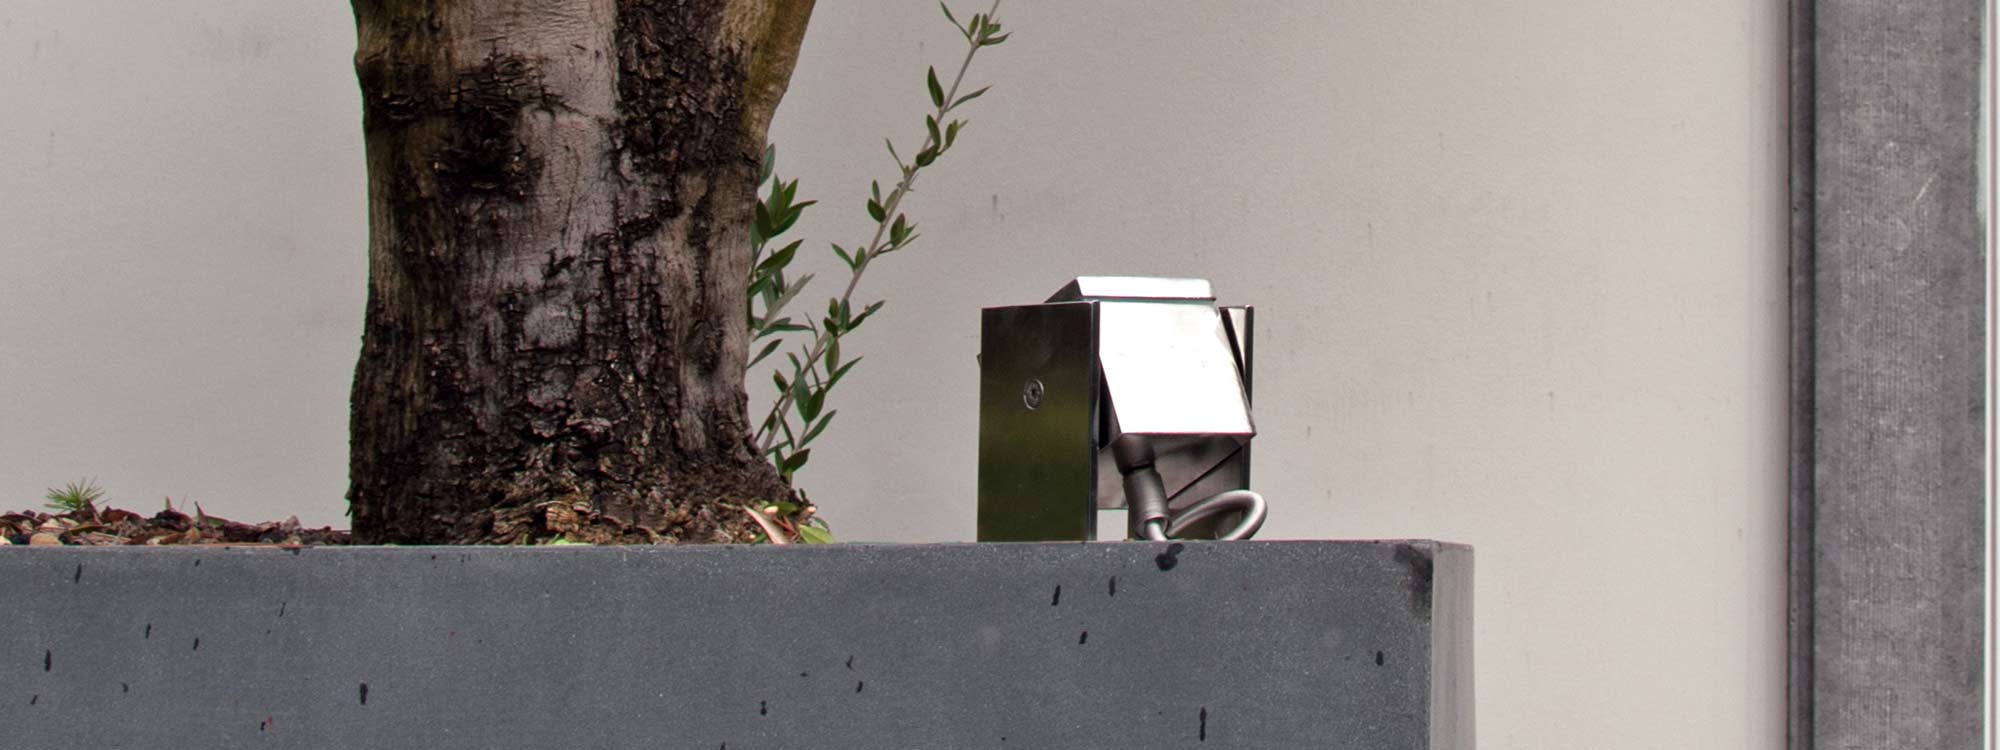 Image of Royal Botania Q-BIC minimalist adjustable garden spotlight in EP stainless steel, shown angled-up at olive tree